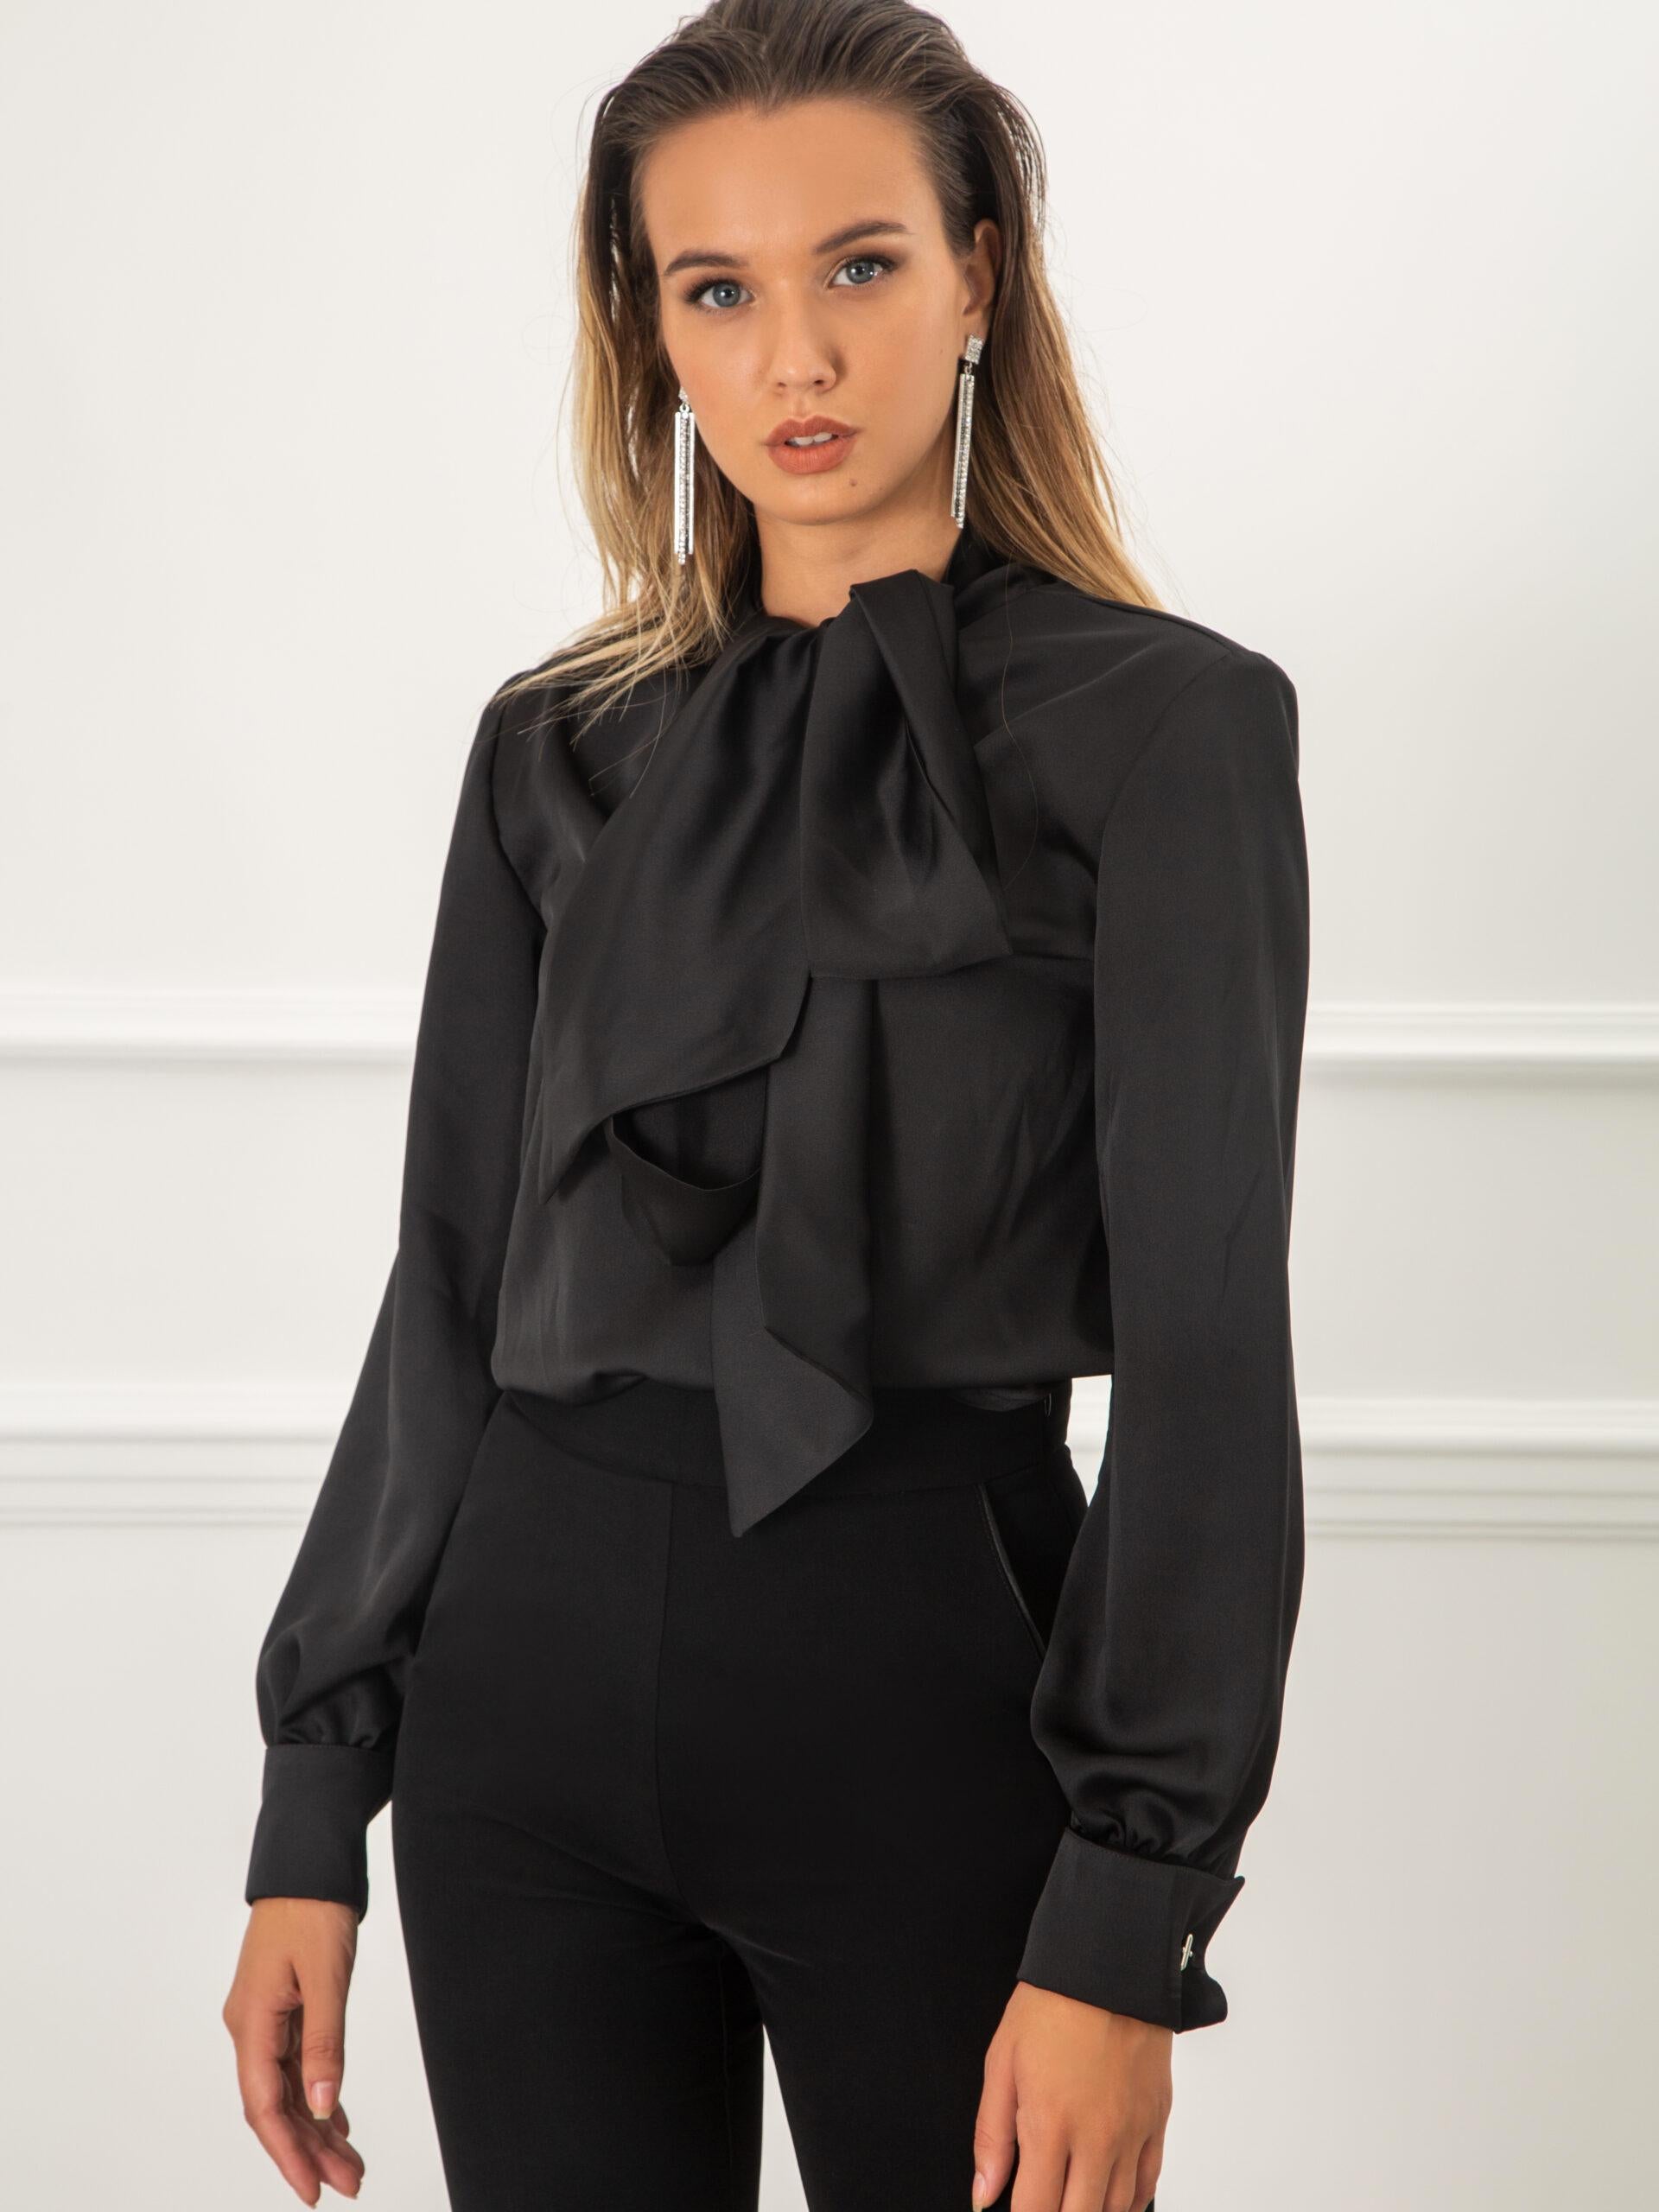 The pussy-bow neckline of the MADA blouse gives it a timeless and romantic appeal. It is crafted in Italy with the option to remove the neck tie, leaving in its place a simple rounded neckline.